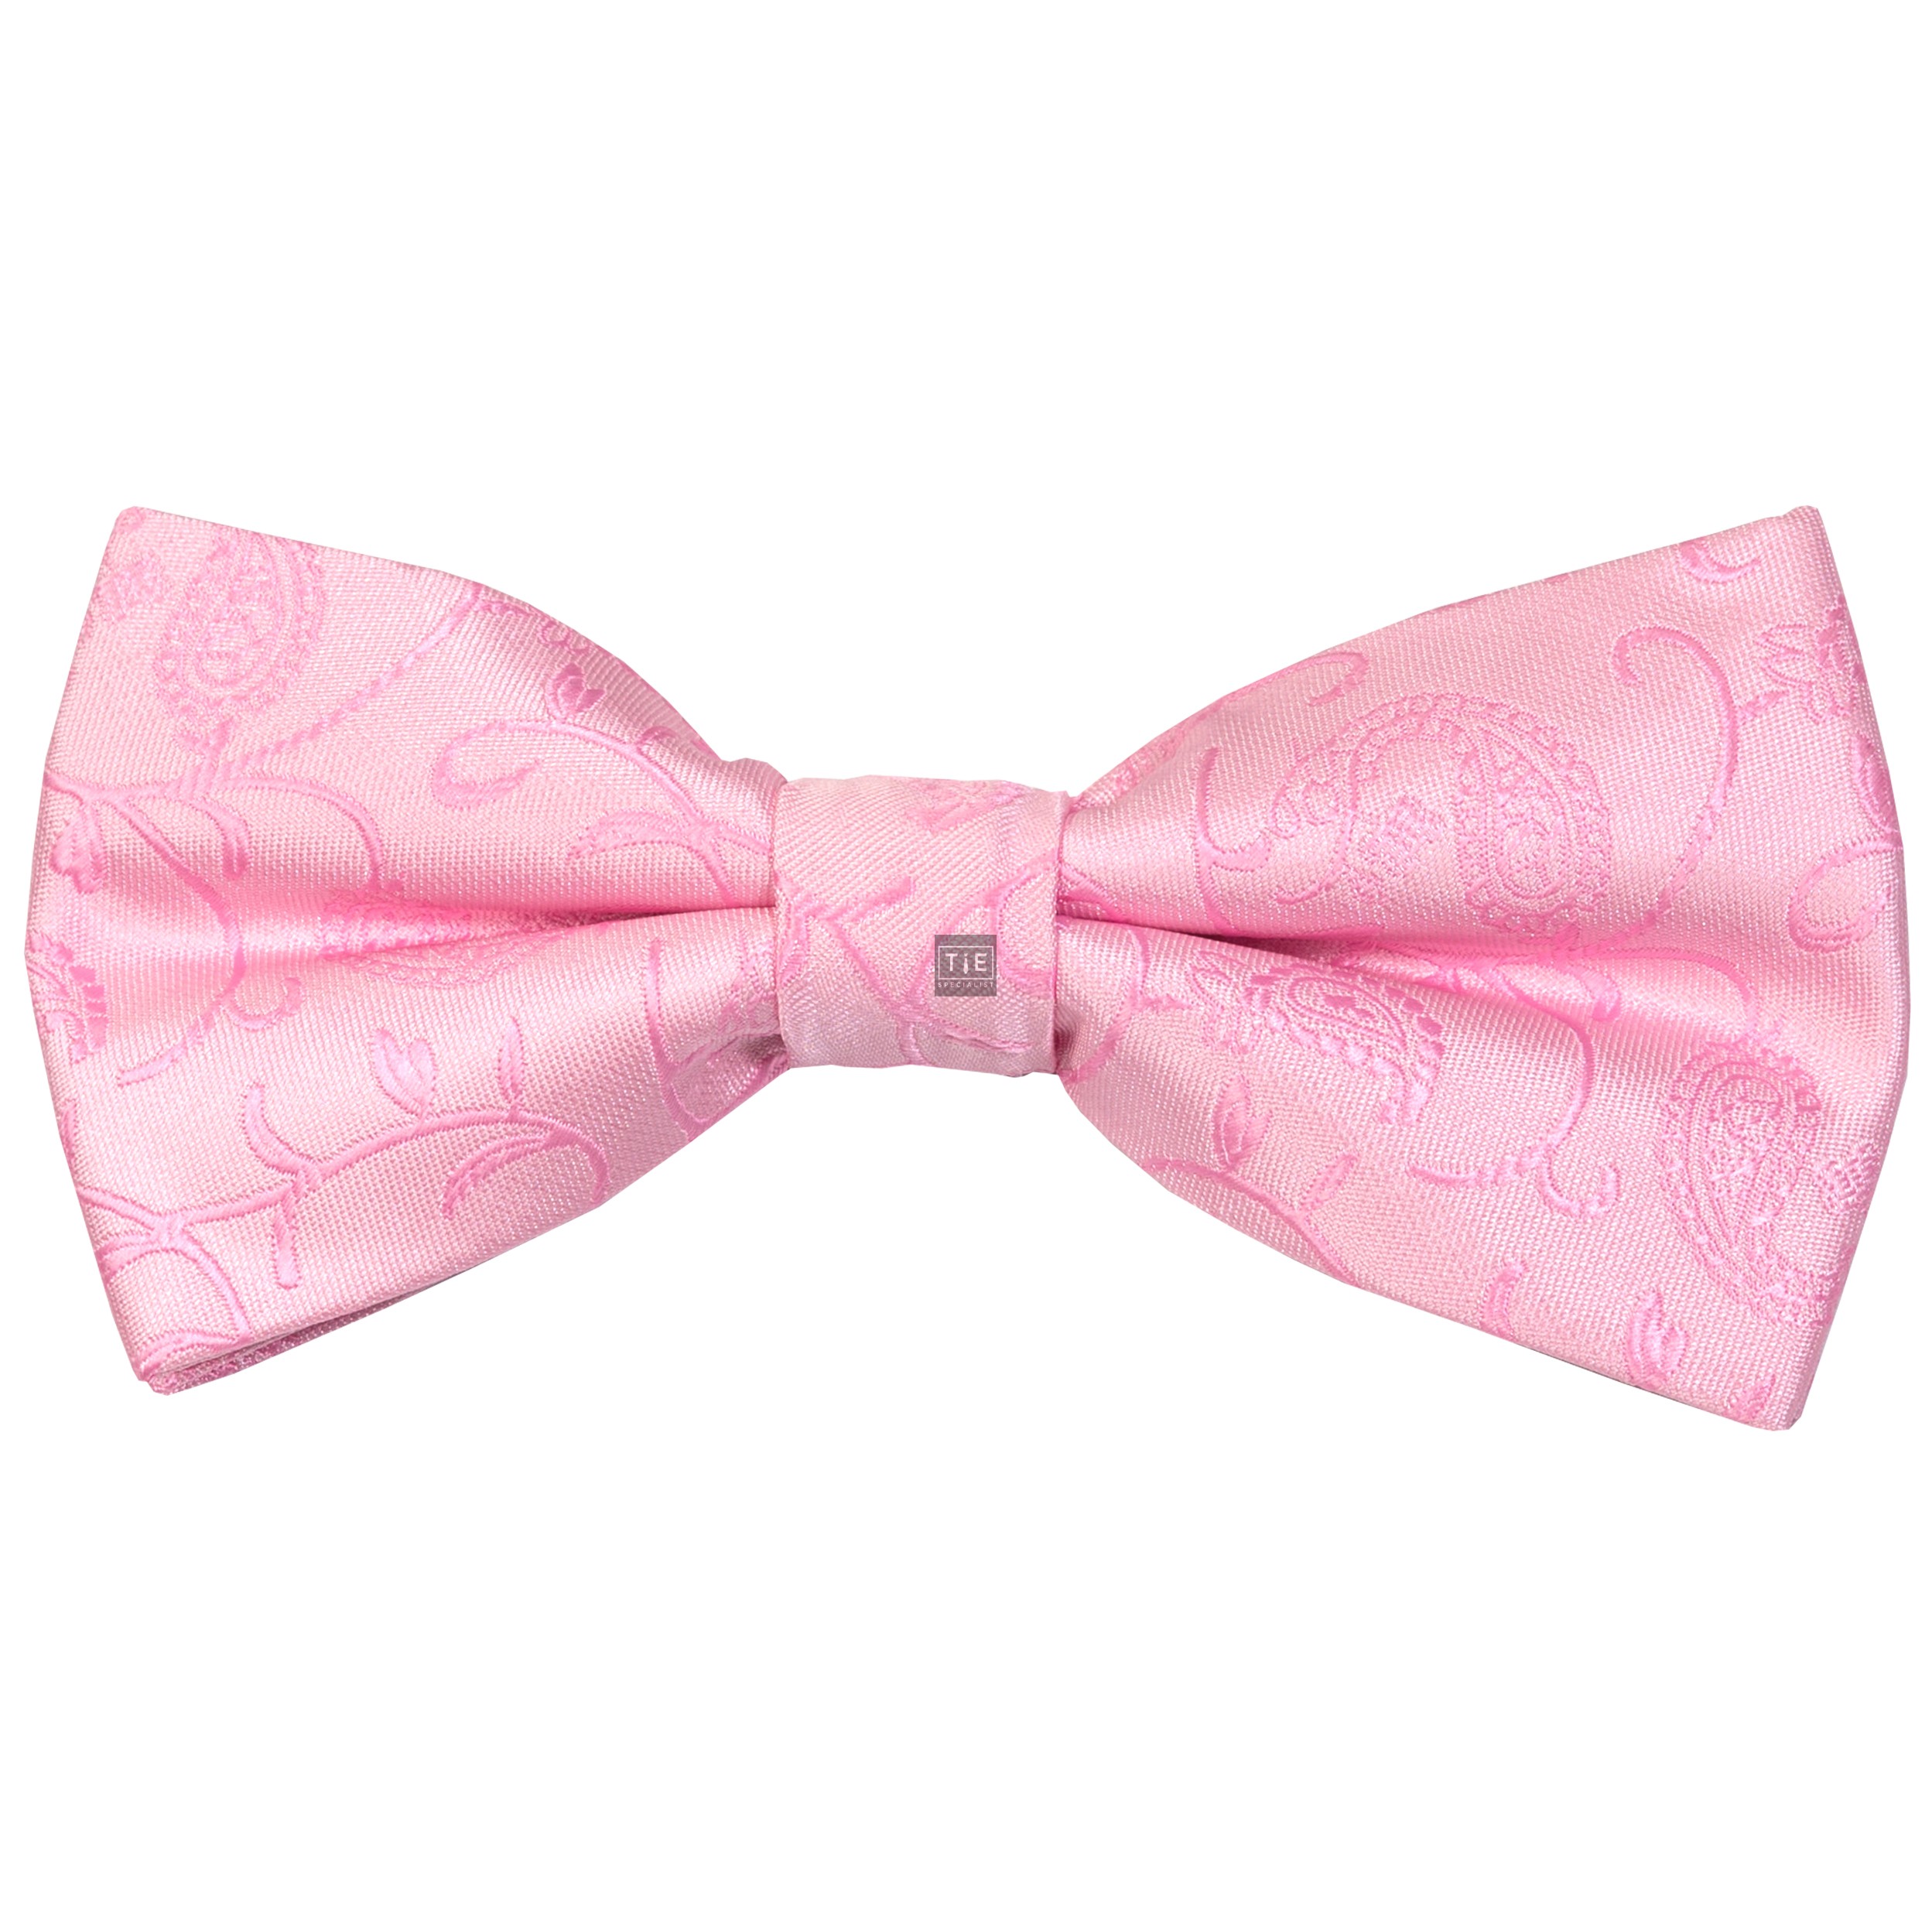 Budding Paisley Wedding Bow Tie Gents Formal Bow Tie